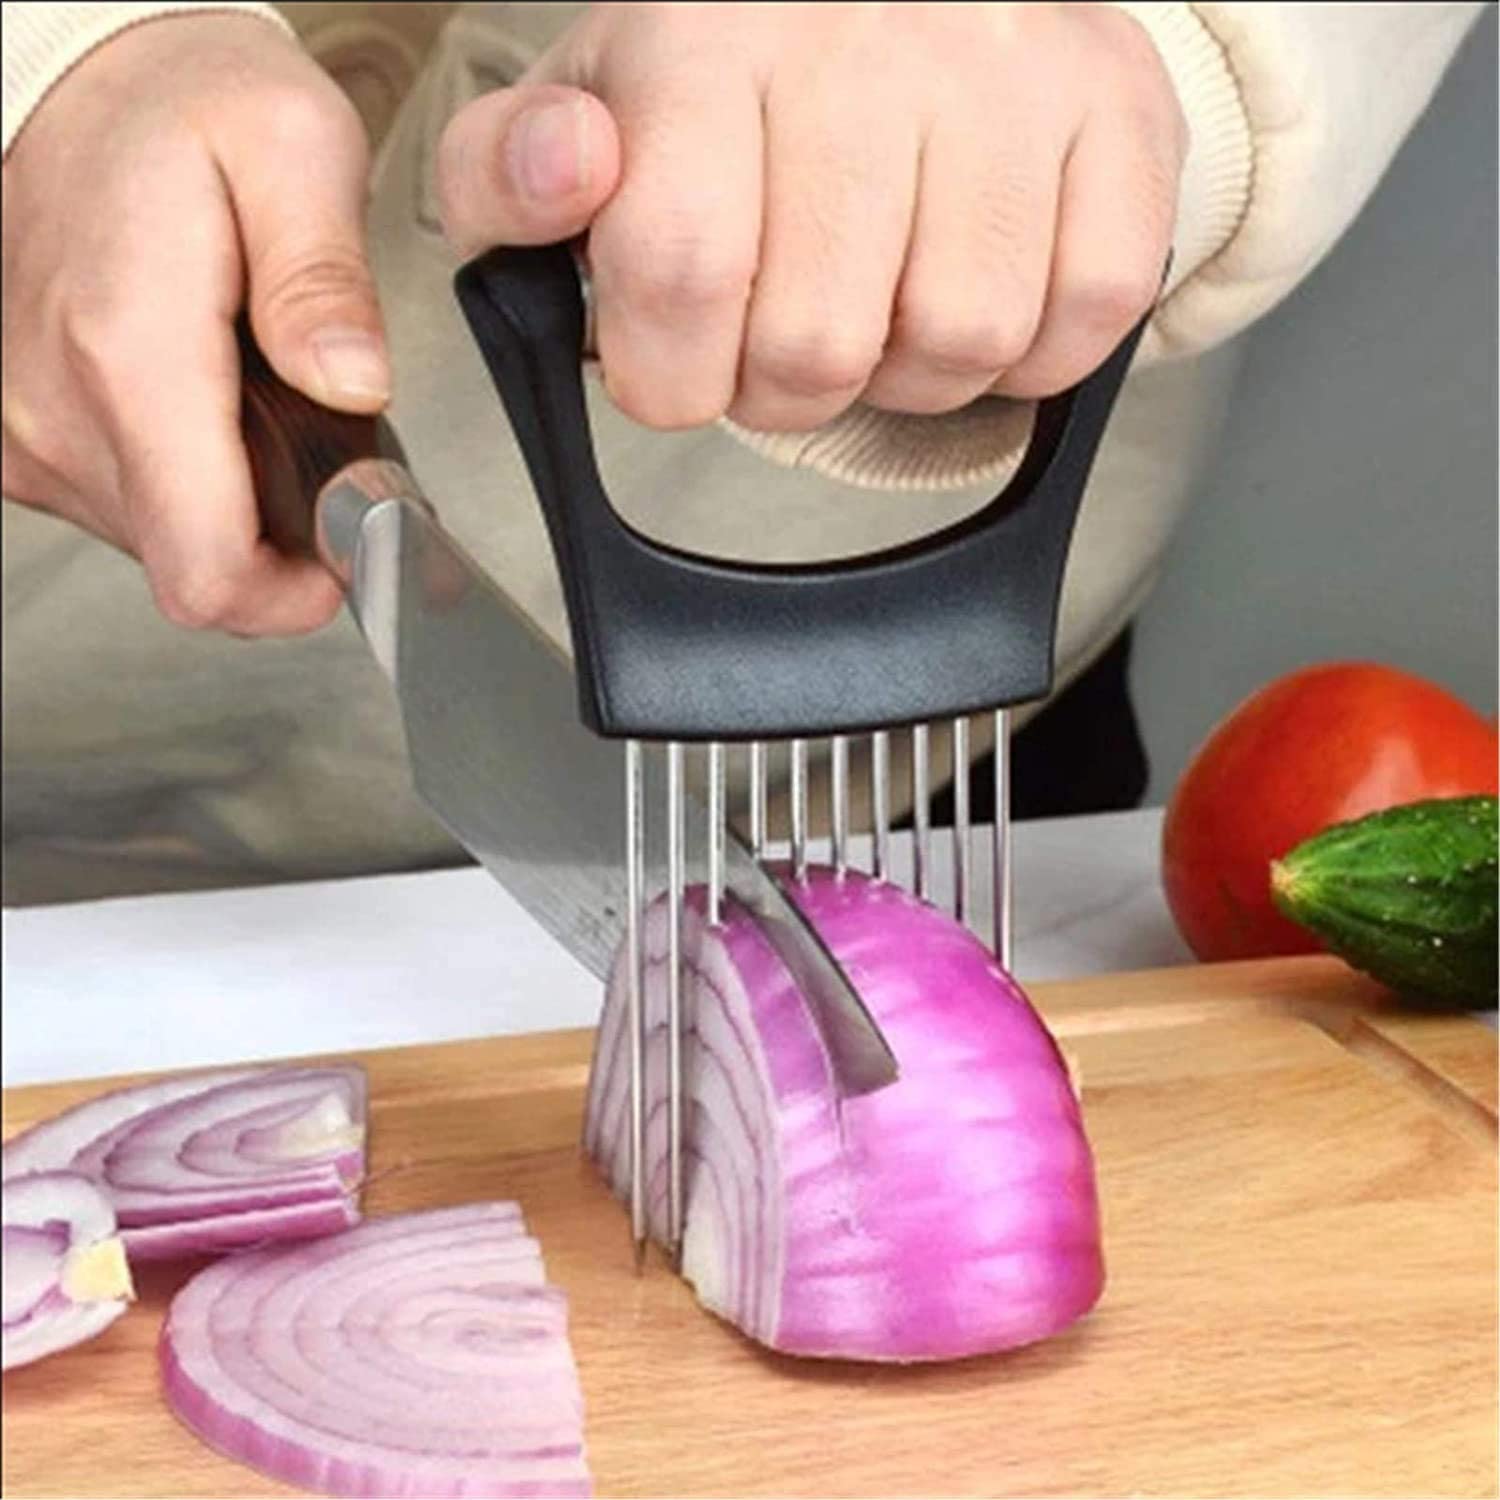 Picture showing onion holder for easily cutting onions